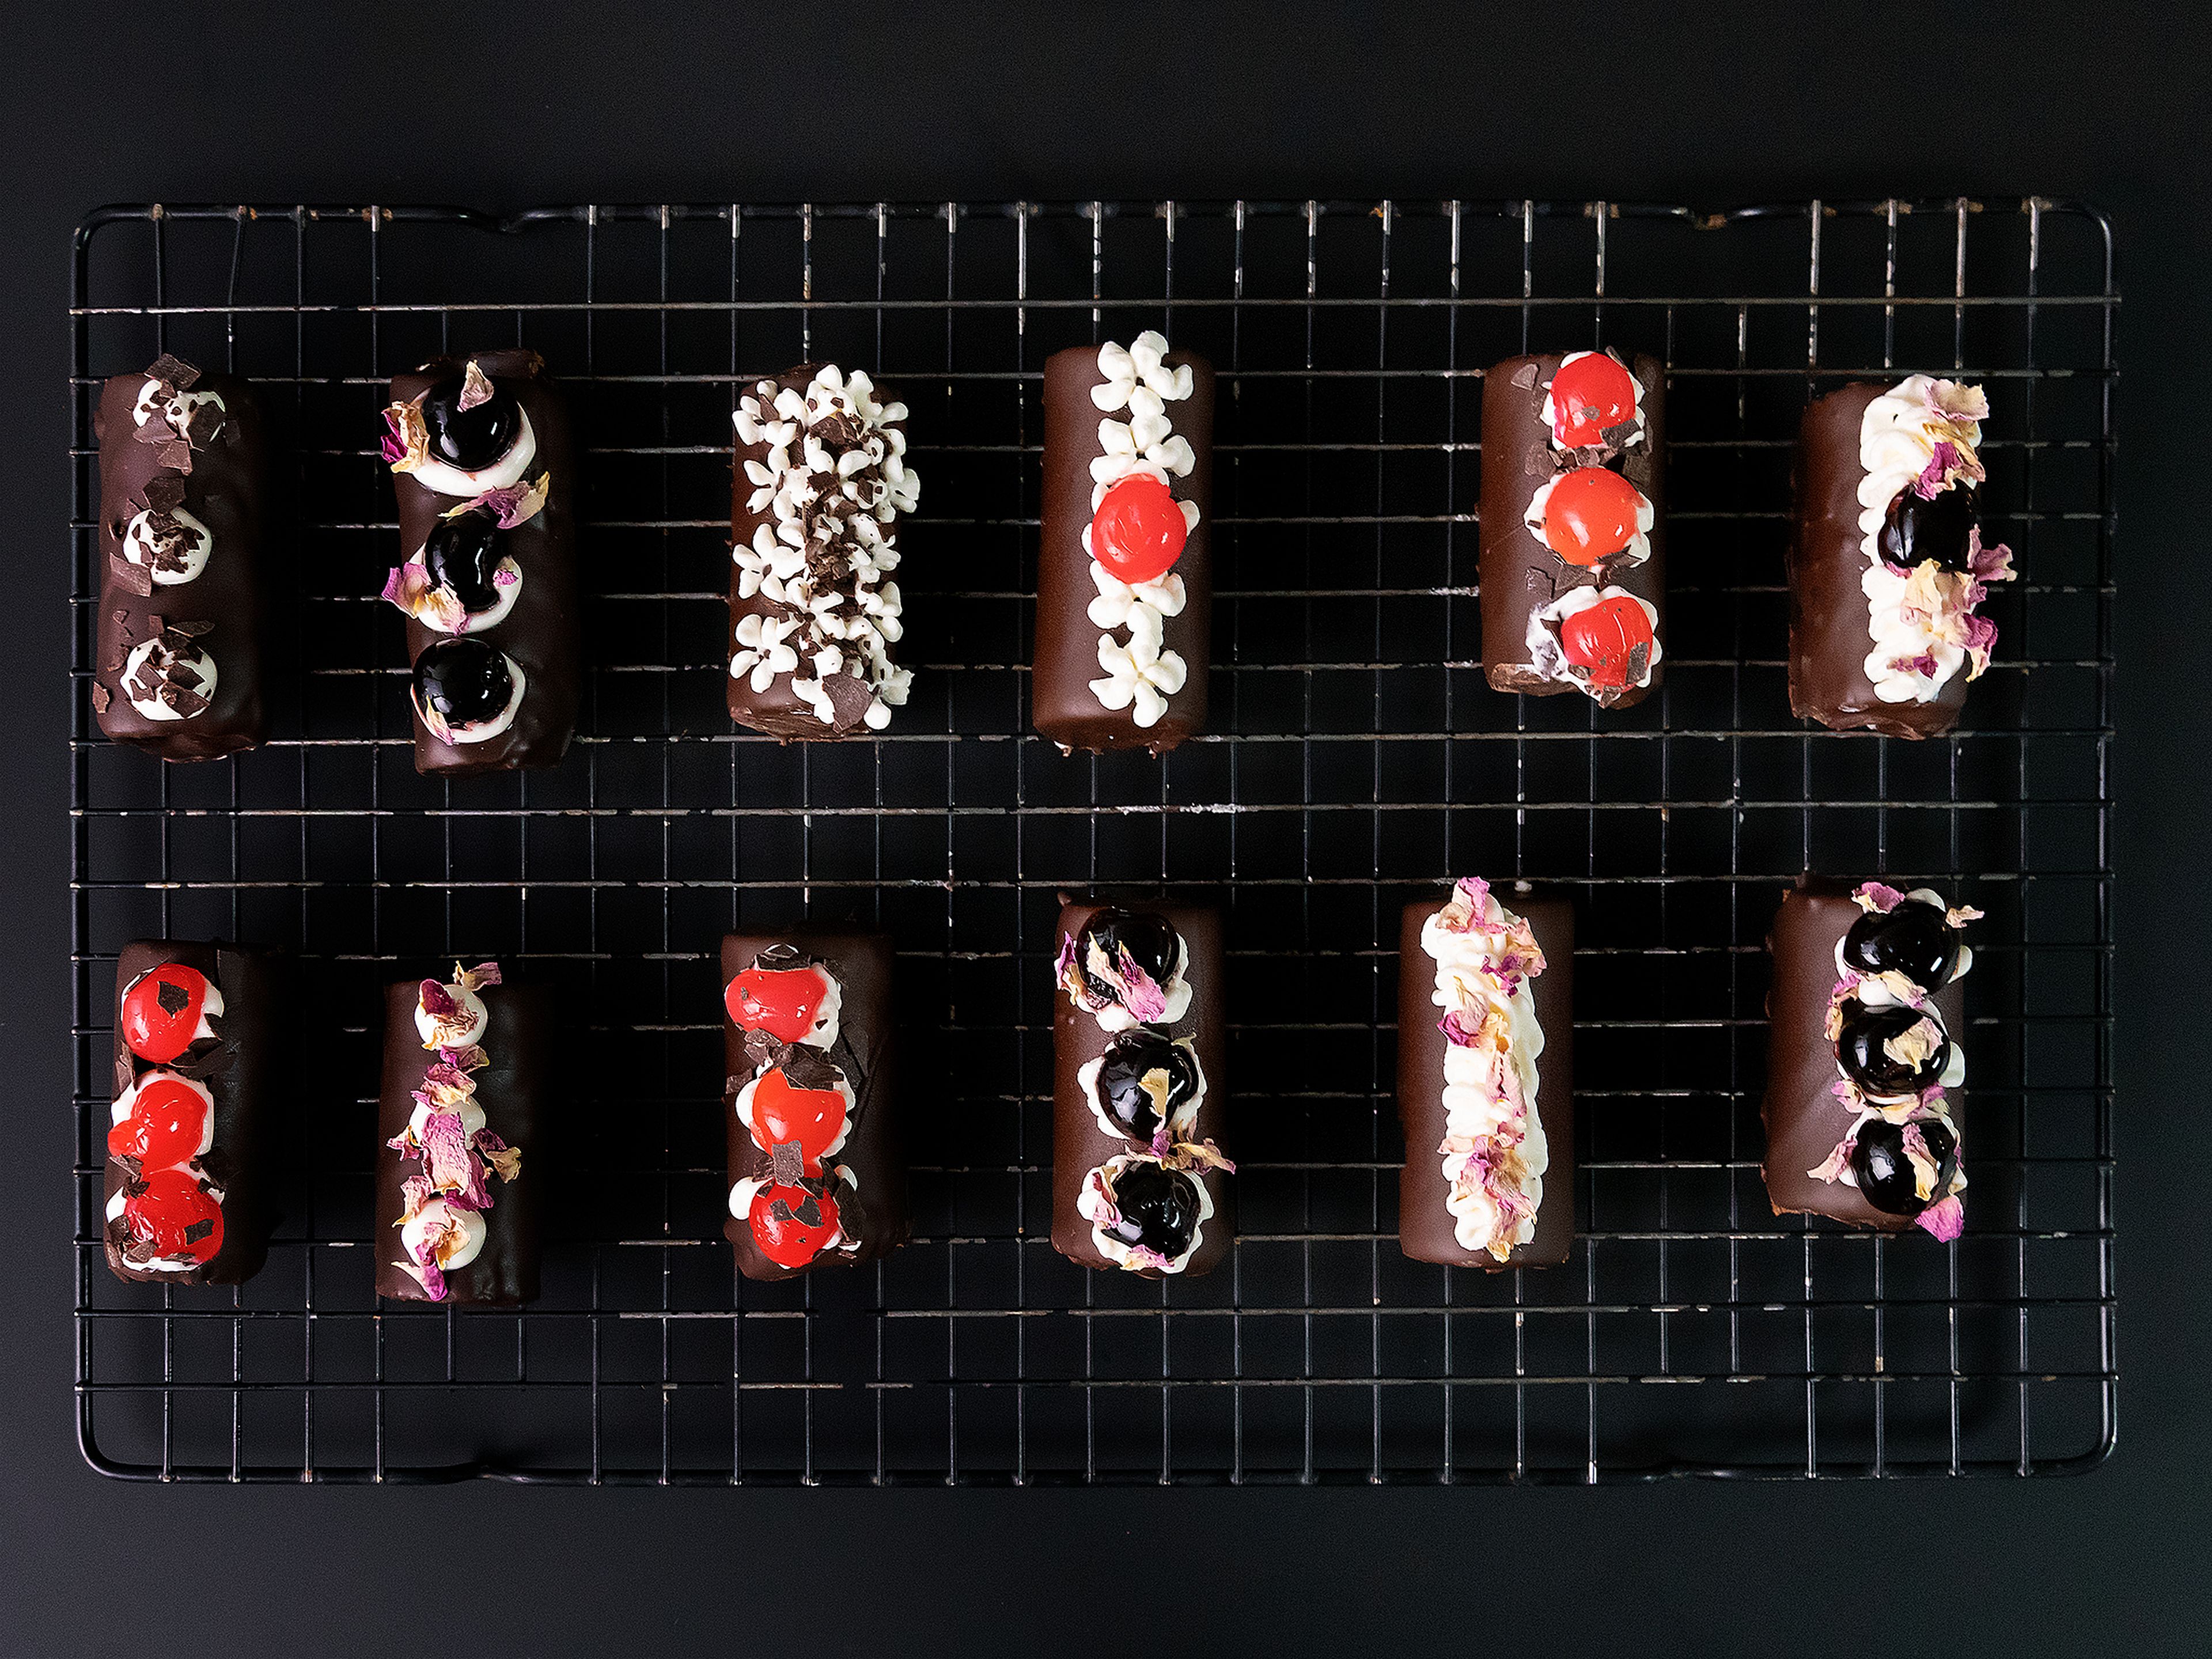 In Need of a Baking Project? Try These Mini Swiss Rolls